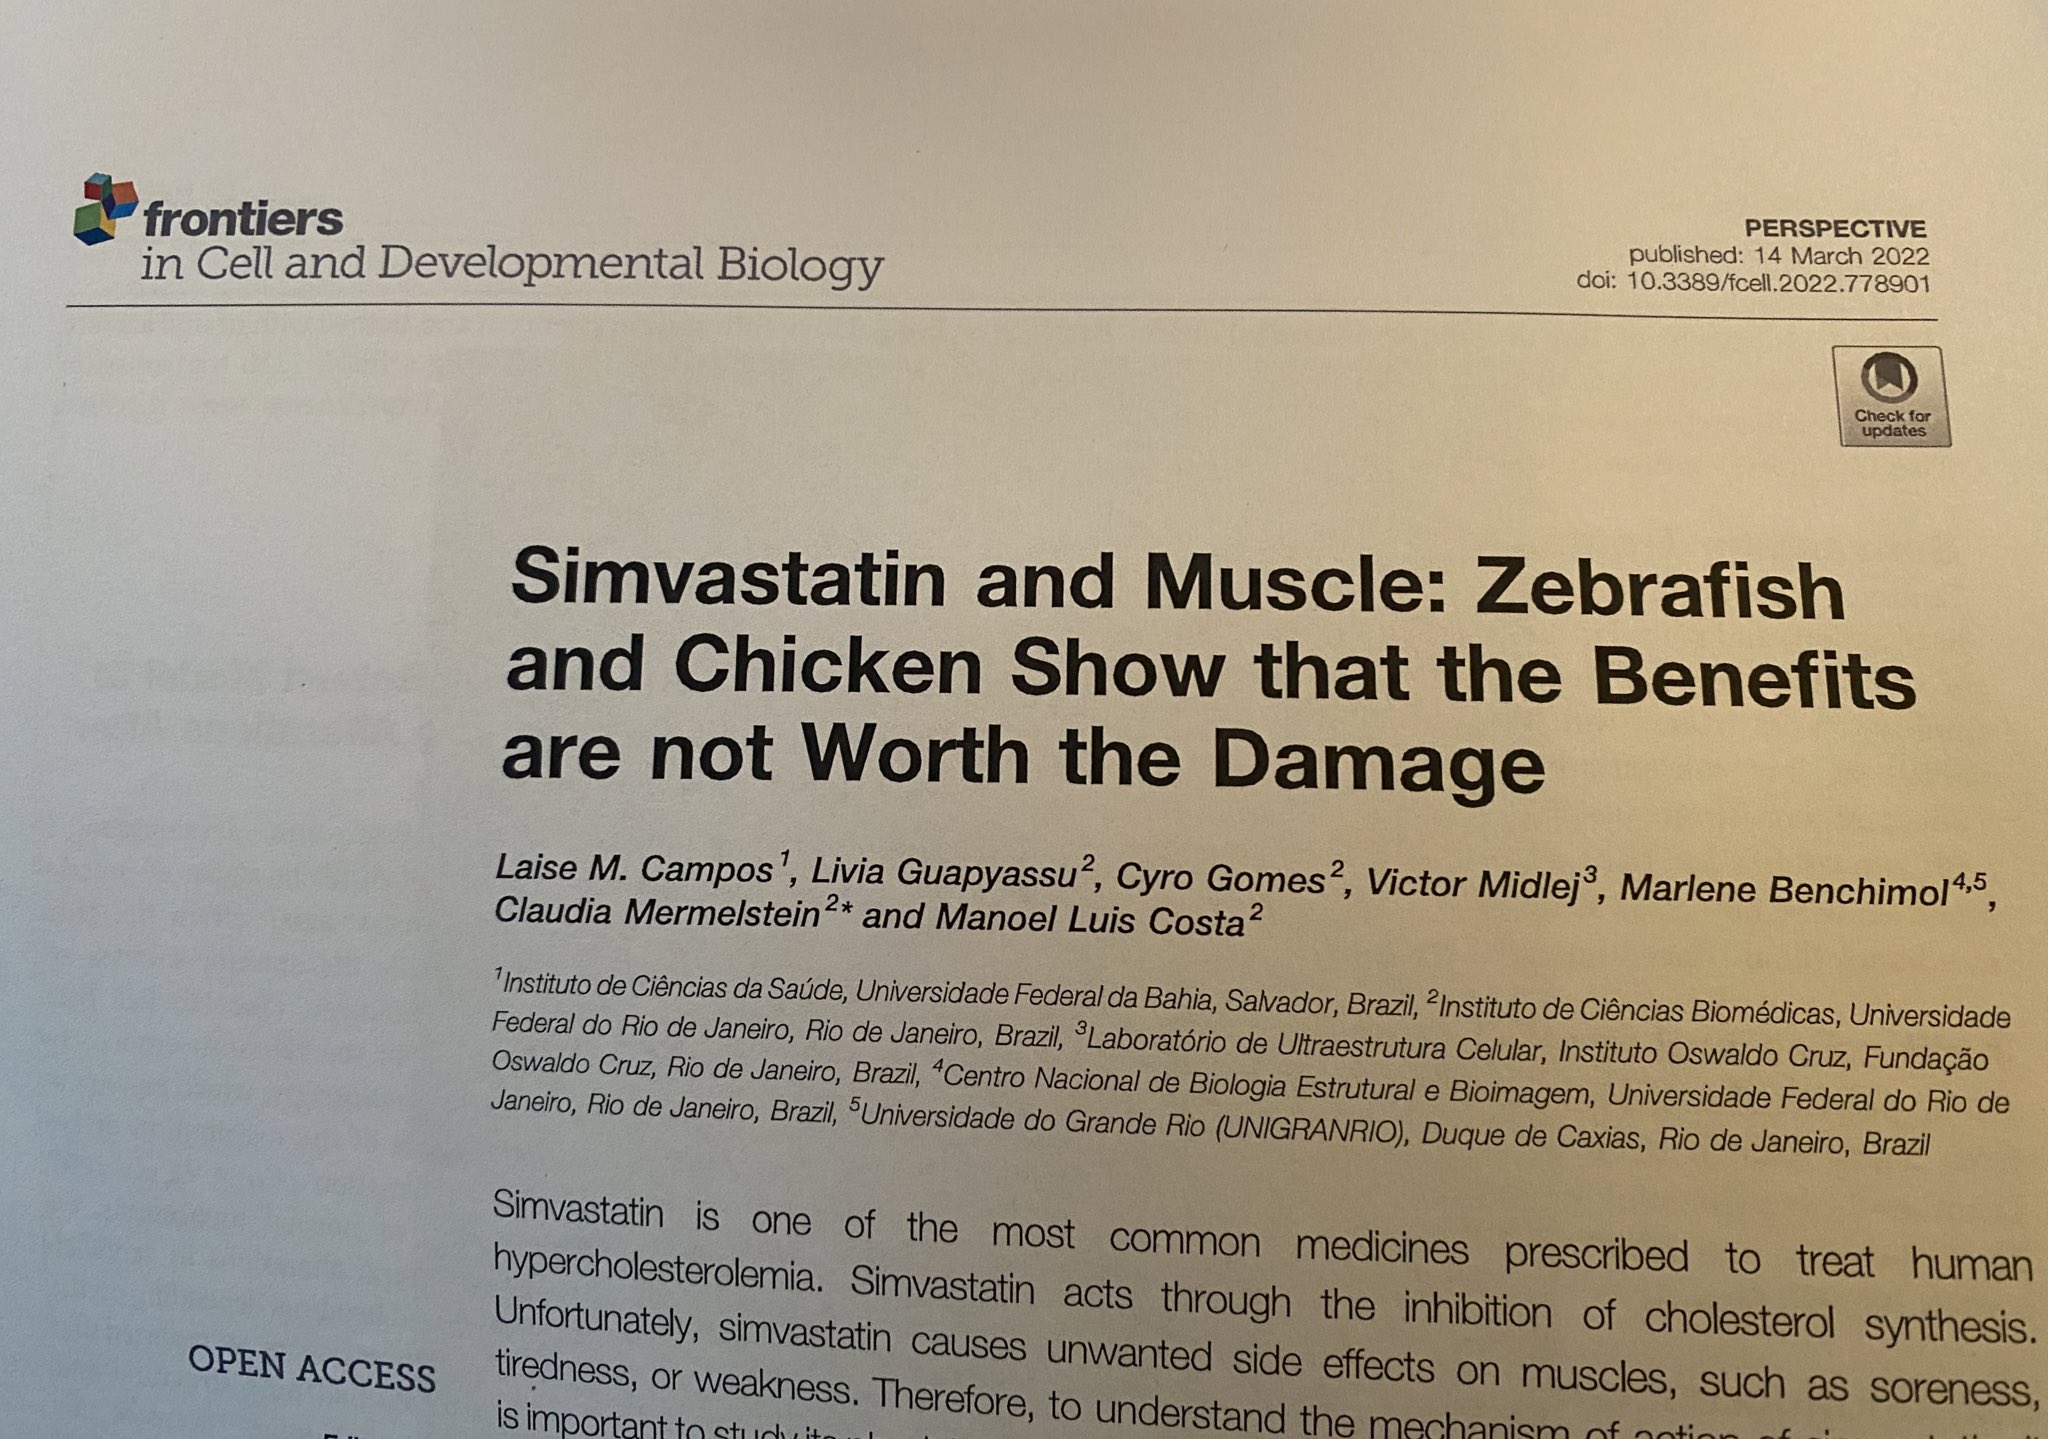 Today’s pick is by Campos et al from Frontiers in cell & developmental biology on the effect of simvastatin on muscle development doi 10.3389/fcell.2022.778901 Simvastatin & other statins reduce the production of cholesterol & in this way reduce blood cholesterol levels. They are a well known treatment for hypercholesterolemia. However, they can also cause muscle pain, tiredness and weakness and even breakdown of muscle (rhabdomyolysis). Here authors studied the effect of simvastatin on zebrafish muscle development. They benefit from the fact that zebrafish larvae are transparent. Using high doses of simvastatin resulted in shorter, 'bendy' fish, while with low concentrations a reduction in myofibrils was seen. Also the movement of the fish/larvae was reduced with simvastatin treatment in a dose dependent manner when applied early (6 hrs) or later (11 hrs) post fertilization. Desmin and mitochondria were mislocalized (top normal, middle mild phenotype, bottom severe phenotype) IMAGE When authors supplied cholesterol and simvastatin most of the deficits were normalized, suggesting that the results are due to a reduction in cholesterol. Authors further studied the potential effect on regeneration in primary muscle cell cultures from chicken. This showed that with simvastatin proliferation was reduced. Authors speculate that likely due to lower levels of cholesterol, membranes are less stable and cells less able to proliferate and later differentiate (which makes sense to me - you need cholesterol/lipids to divide) Authors discuss that their work focuses mainly on embryonic development of muscle and therefore the mechanism of simvastatin on postnatal muscle is not yet known and needs to be further studied. They state that the effects observed are dose dependent. Given that the effects are dose dependent I am disappointed that authors do not explain how the doses they used in their experiments correlate to the doses used to treat humans. How physiologically relevant are these studies? Maybe doses are much higher than human doses. Authors also discuss the simvastatin work in the mdx mouse model for Duchenne, outlining the controversy of some papers showing a slower disease progression and others (including our group) no effect (see earlier #apaperaday discussions). I was hoping the authors would have an explanation for the discrepancy and the fact that using the same dose and route of administration, ~100 fold differences in blood simvastatin levels are achieved. However, they do not (neither do I so not blame them). Authors indicate that more work is needed in human cell cultures (2D and 3D) and animal models to elucidate this further. I agree but would like to add that physiologically relevant doses should be used in the in vitro systems.